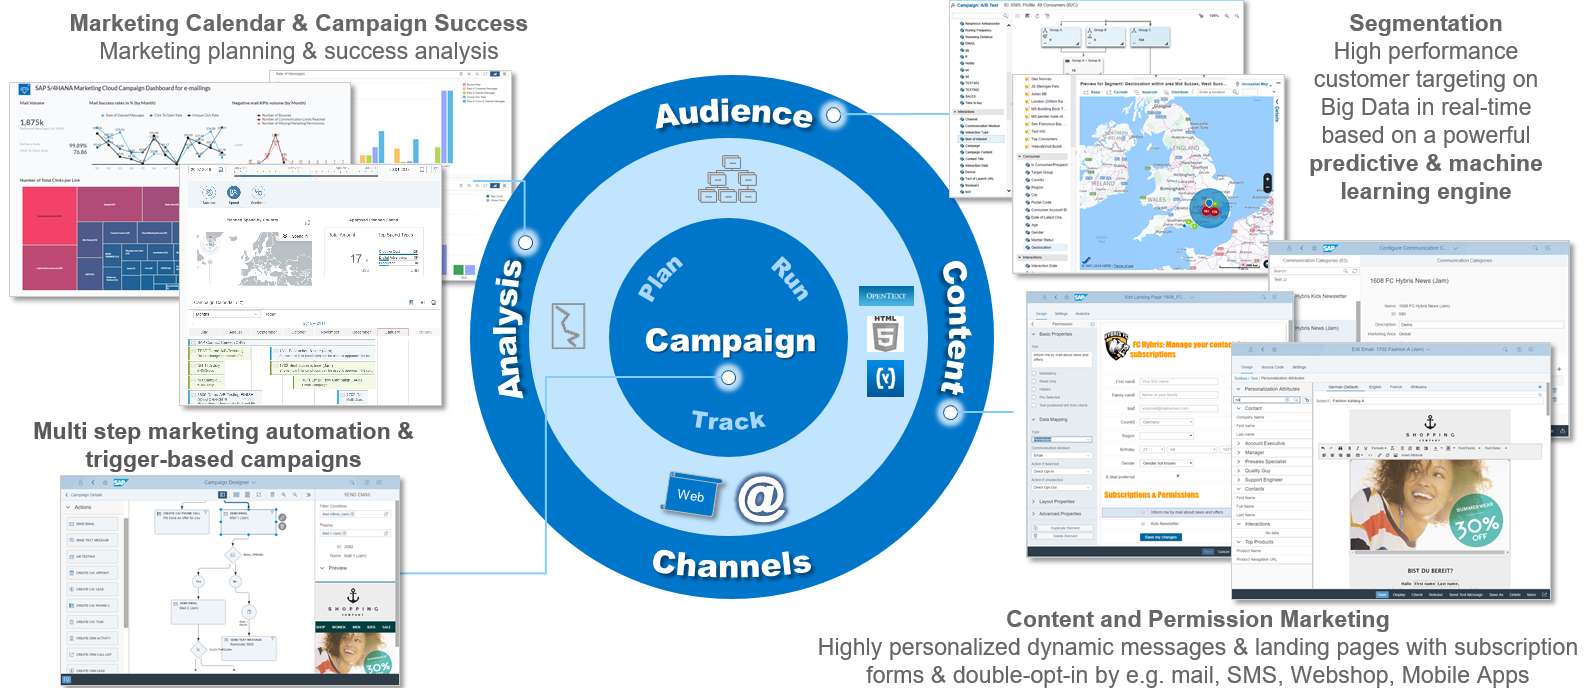 Overview on Campaign Management in SAP Hybris Mark - SAP Community